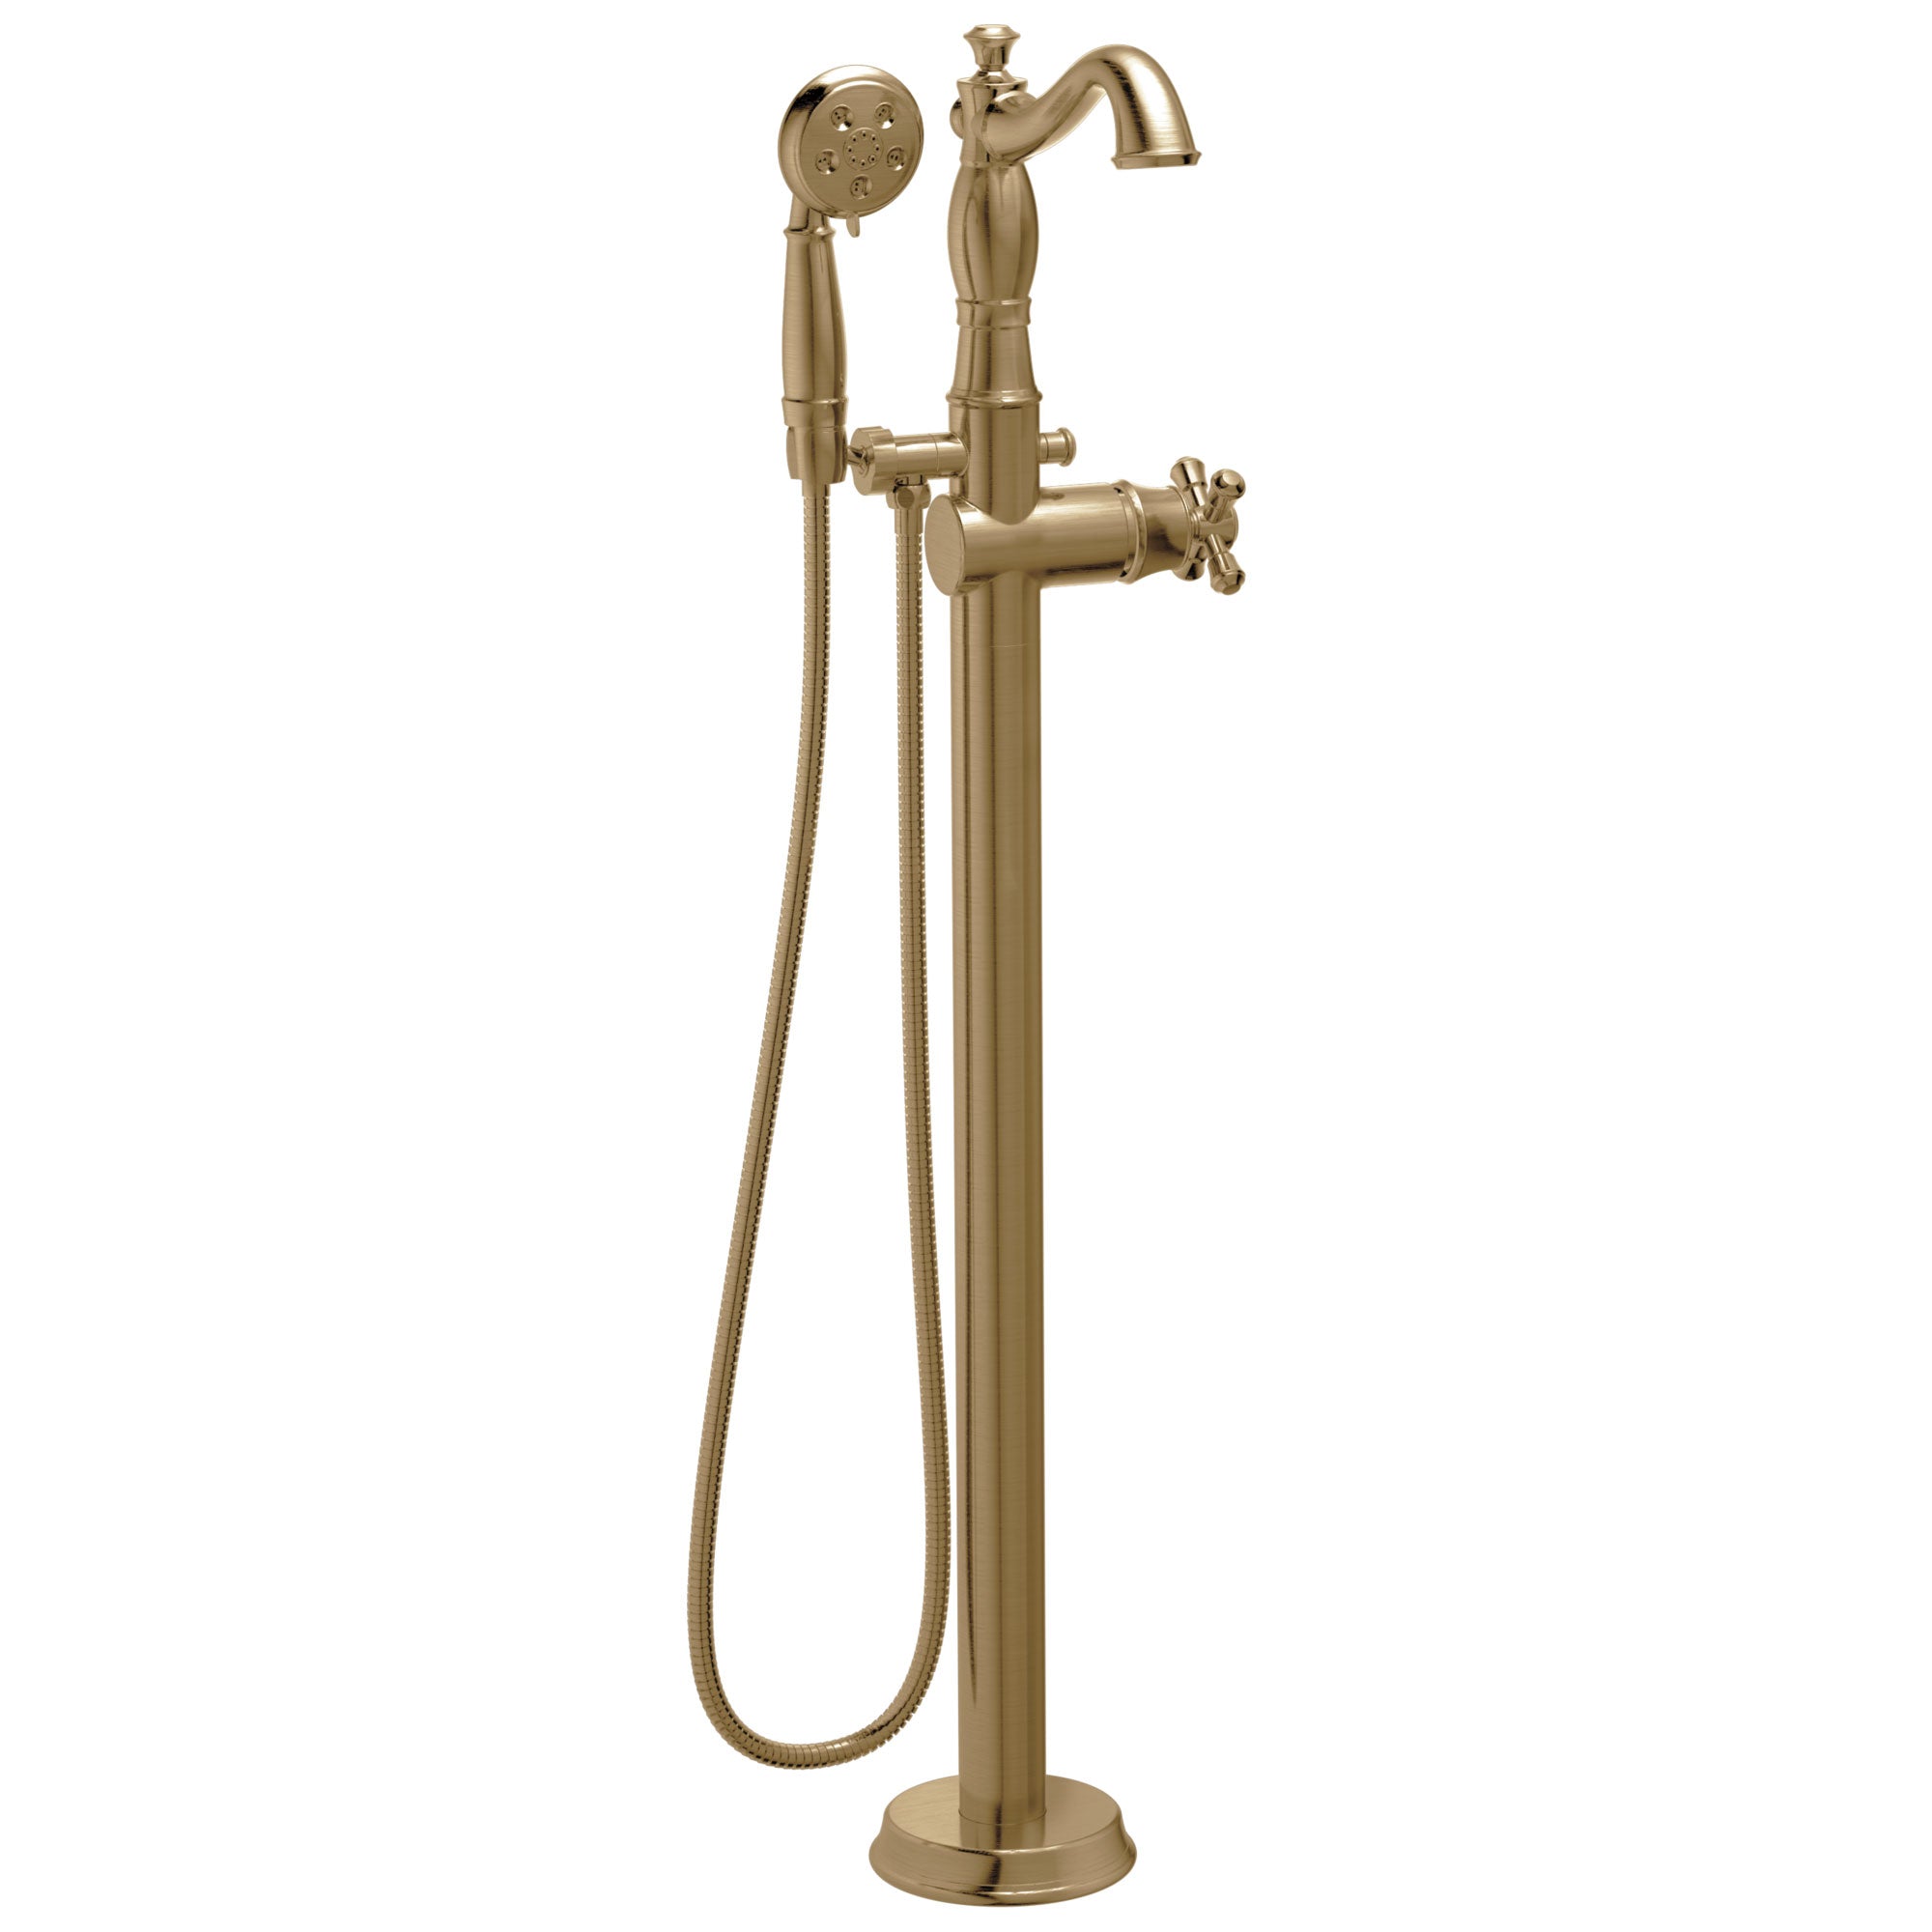 Delta Cassidy Freestanding Floor-Mount Tub Filler Faucet with Sprayer in Champagne Bronze INCLUDES Single Cross Handle and Rough-in Valve D2569V